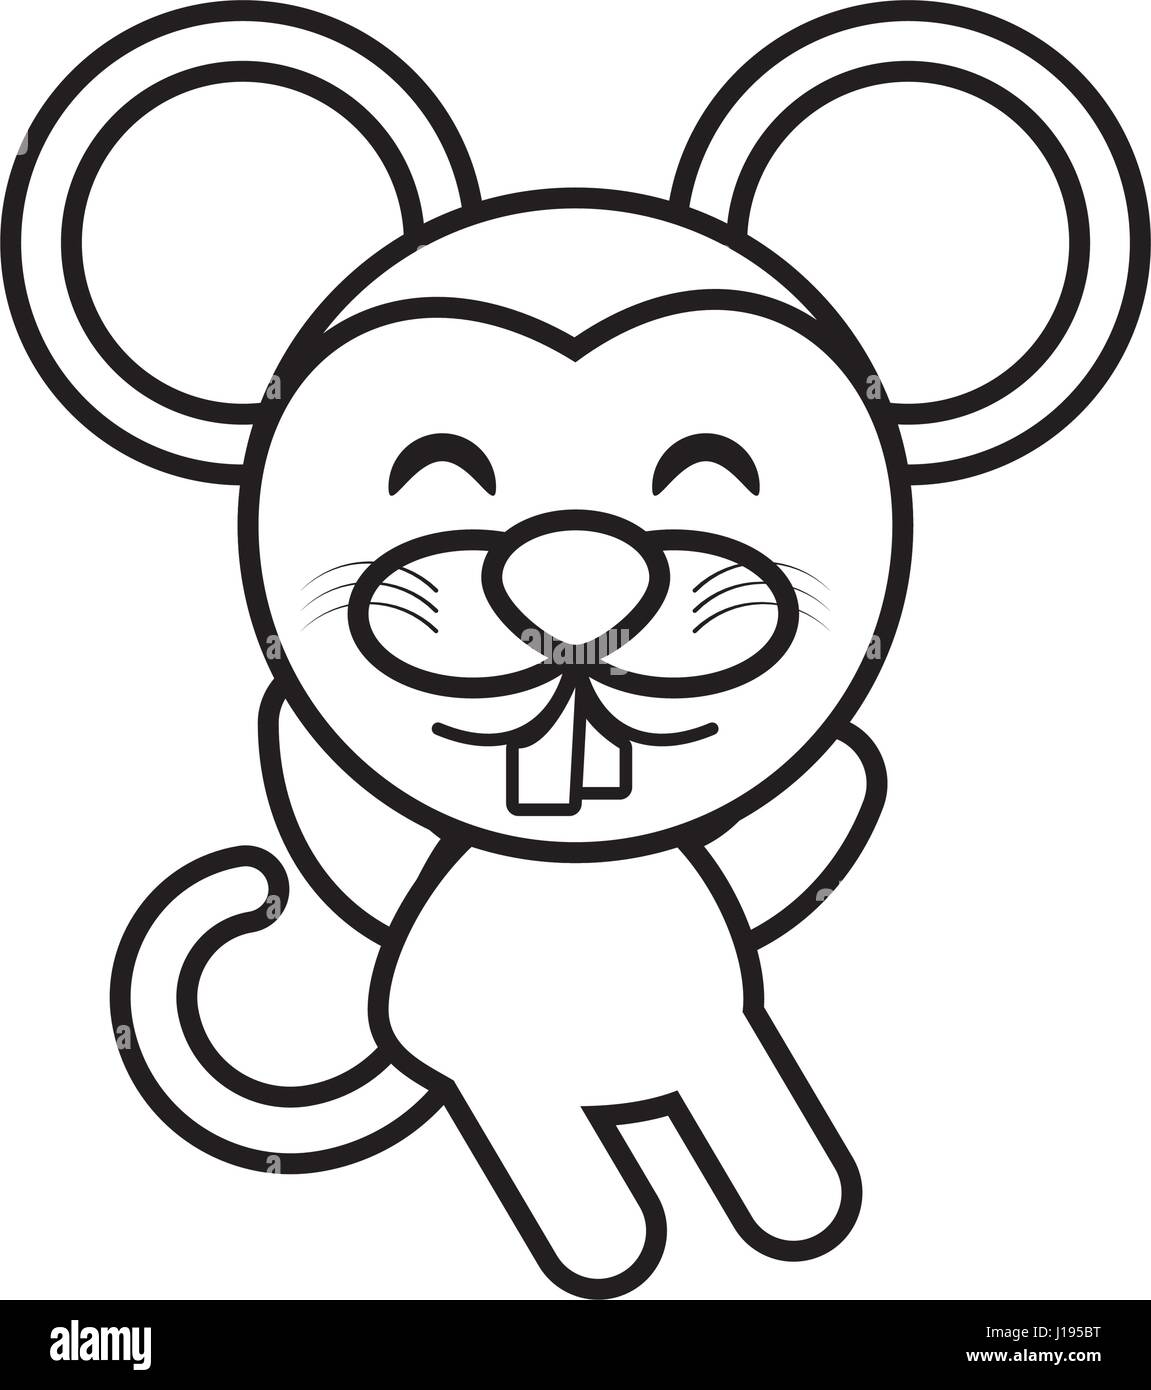 Cartoon Mouse High Resolution Stock Photography and Images - Alamy